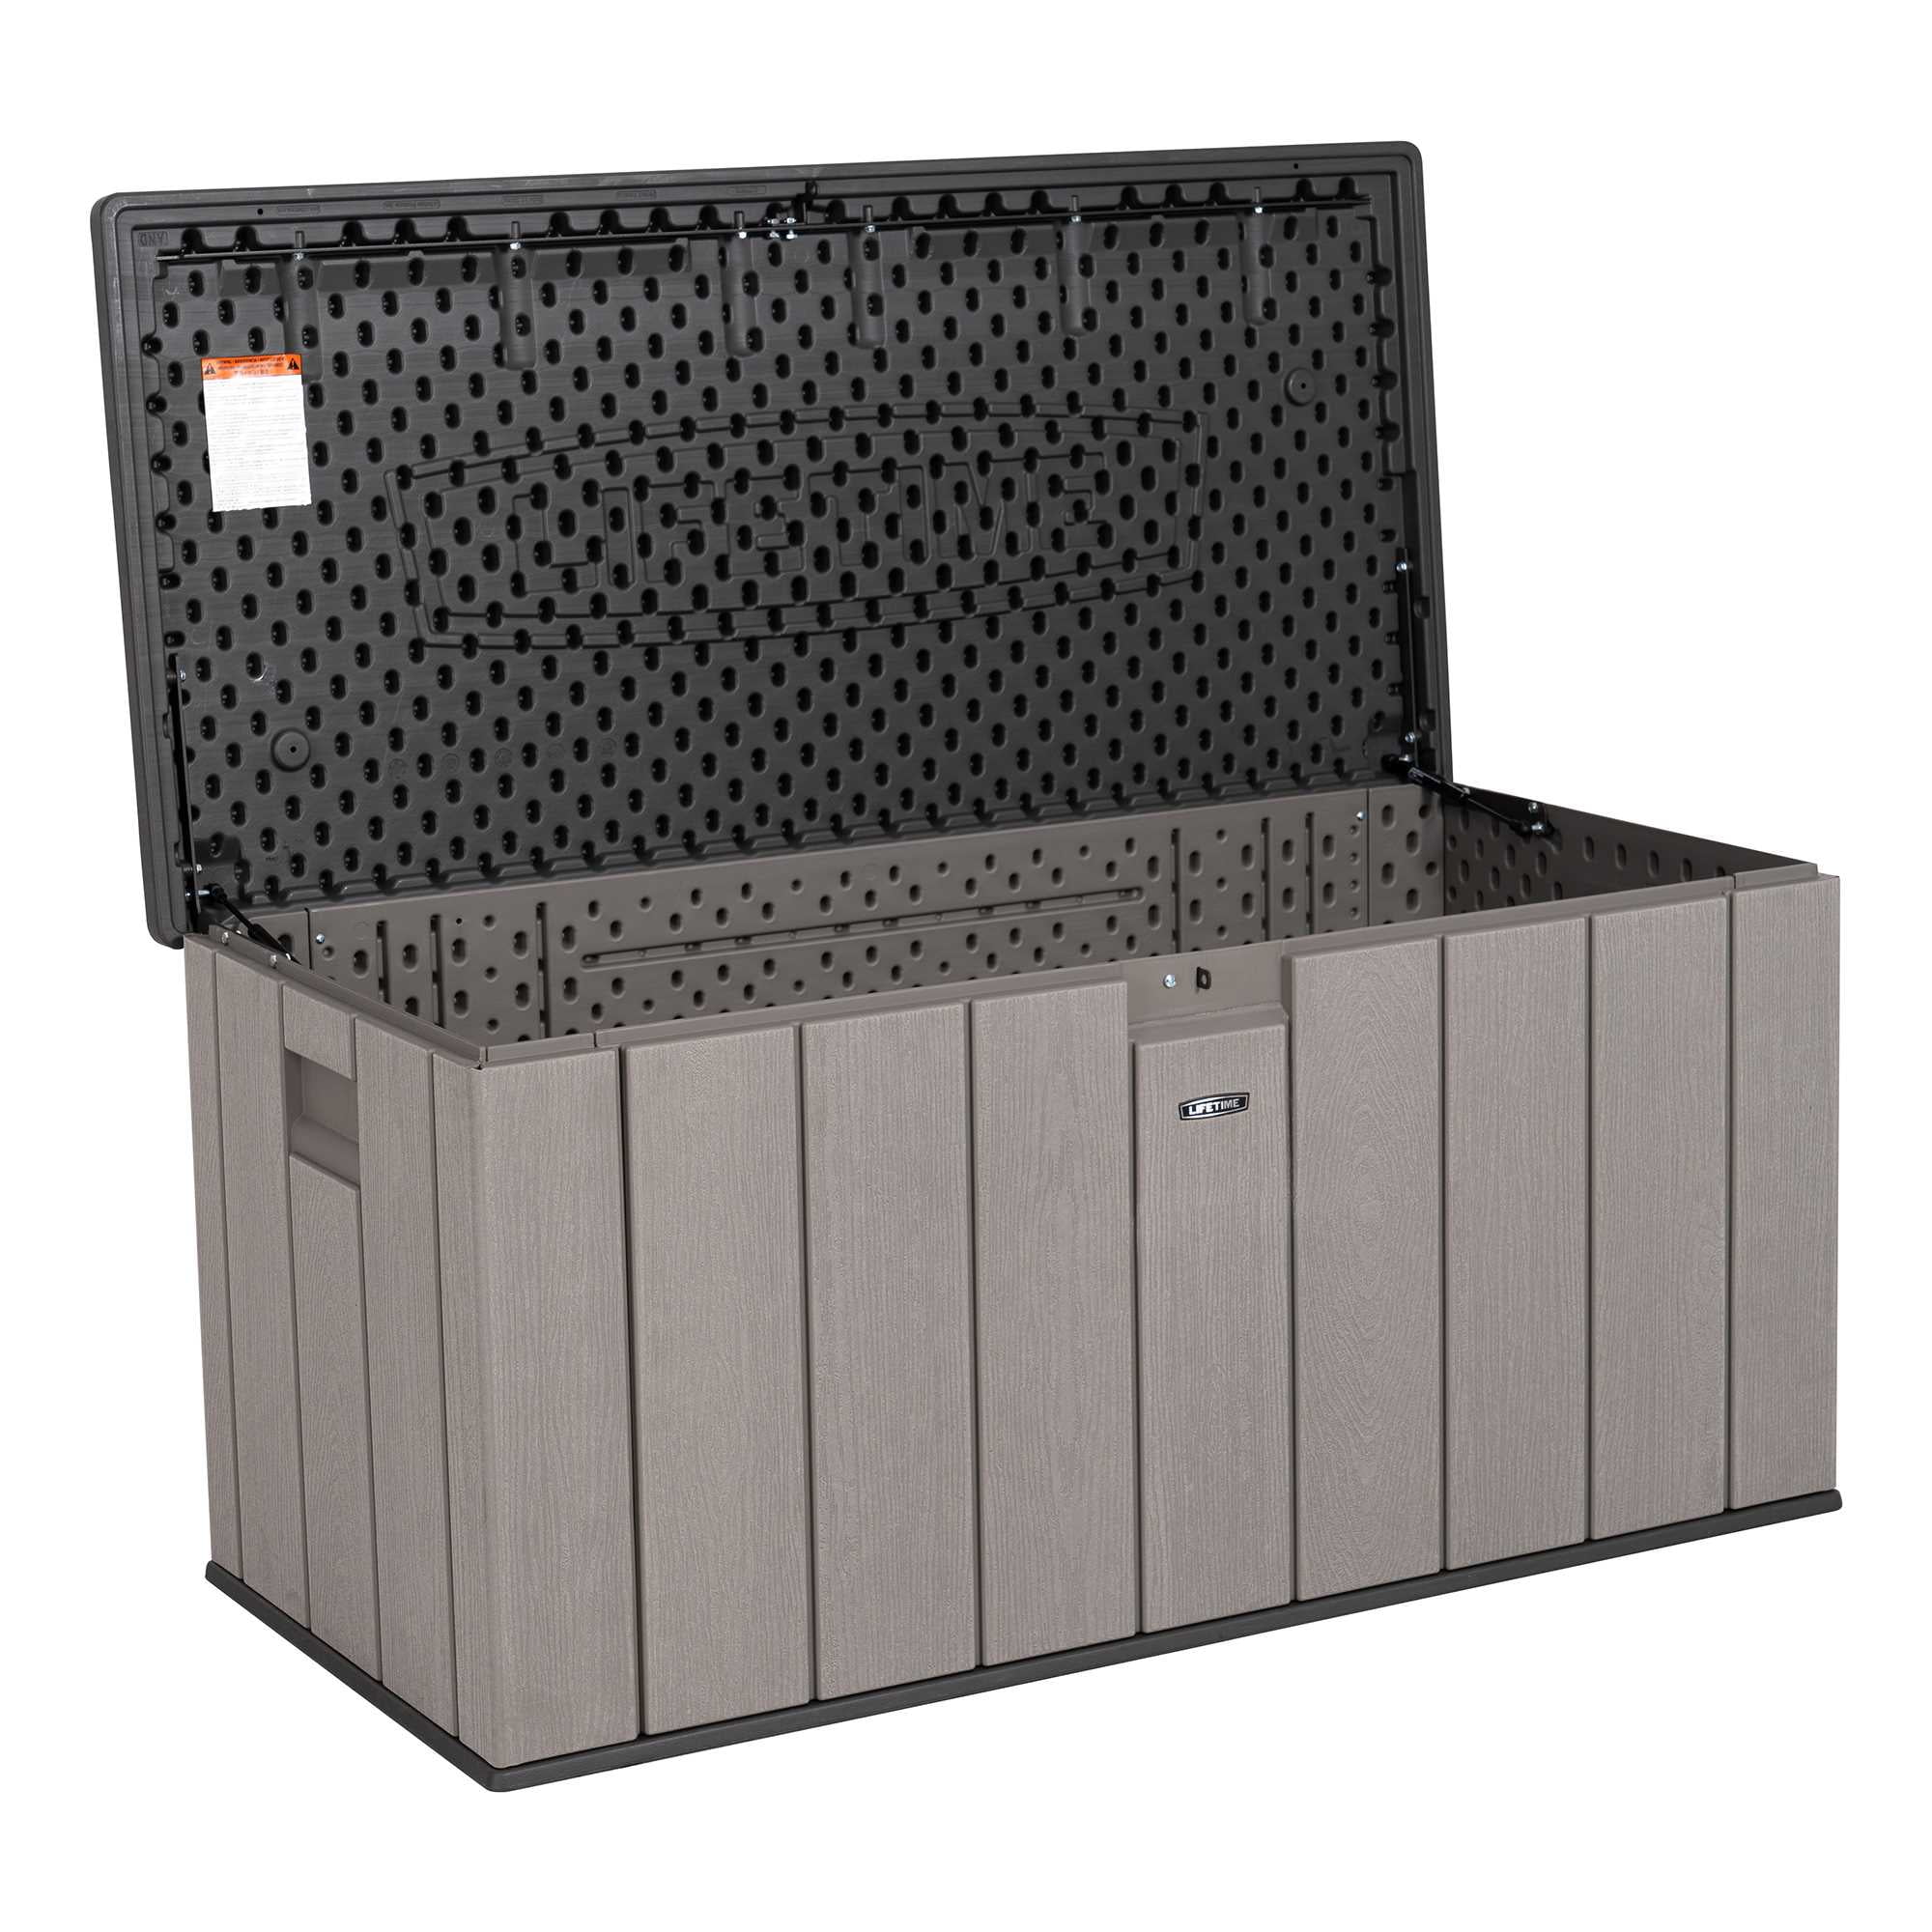 Lifetime 150 Gallon Outdoor Storage Deck Box in Storm Dust Gray - 2